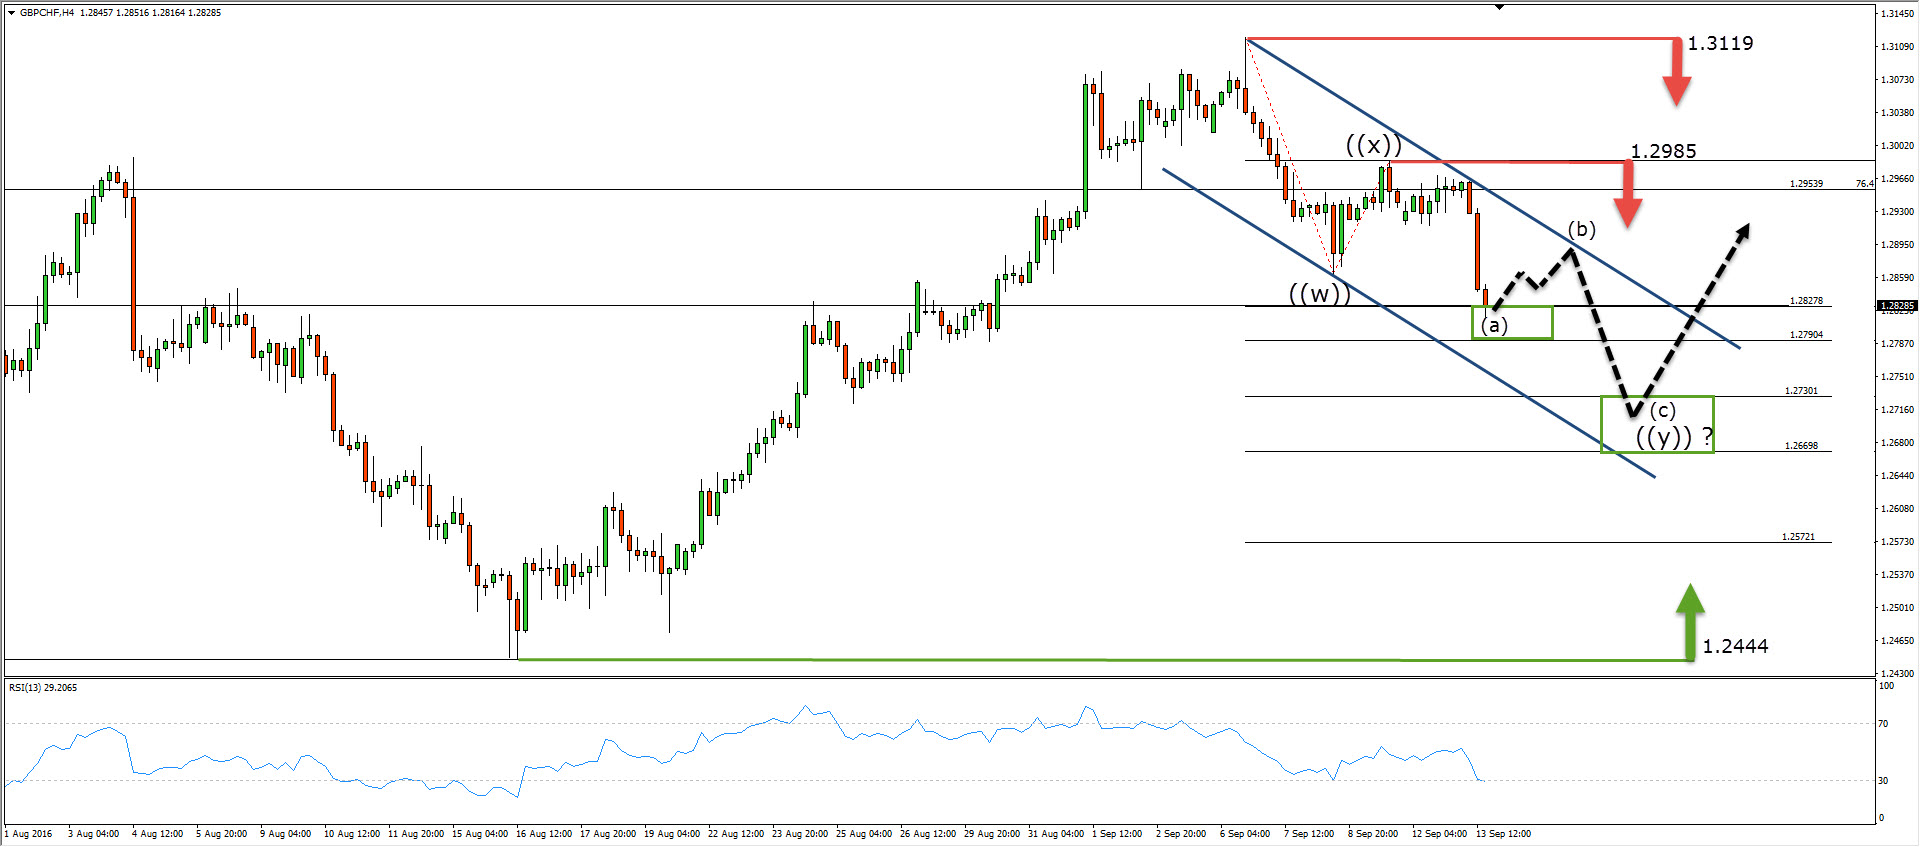 A technical look at $GBPCHF